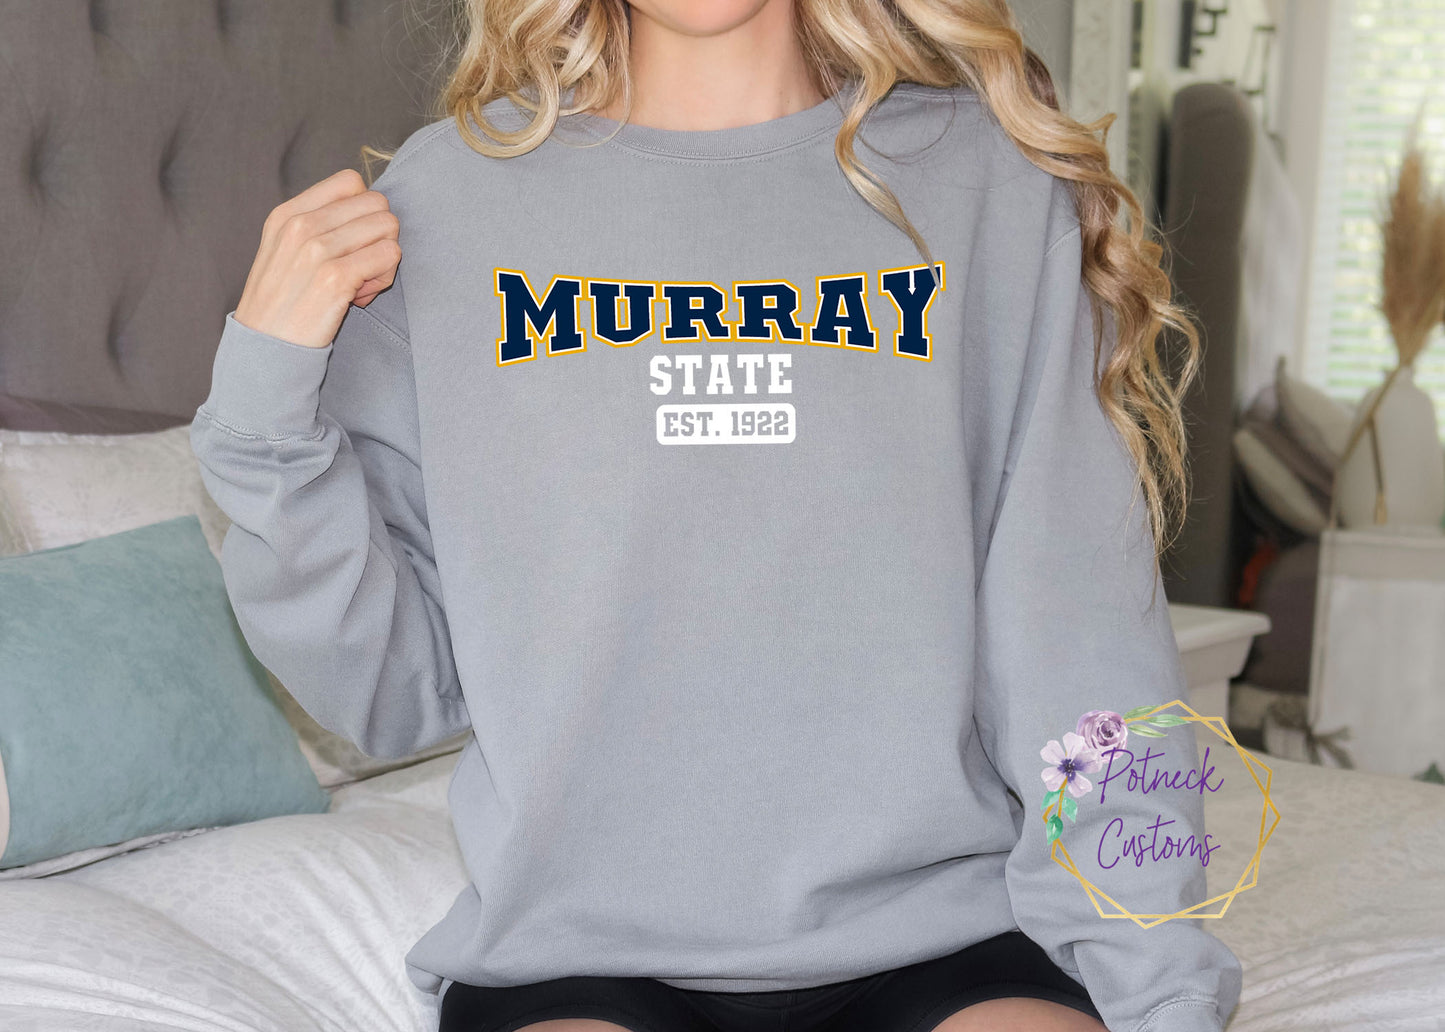 Murray state Racers